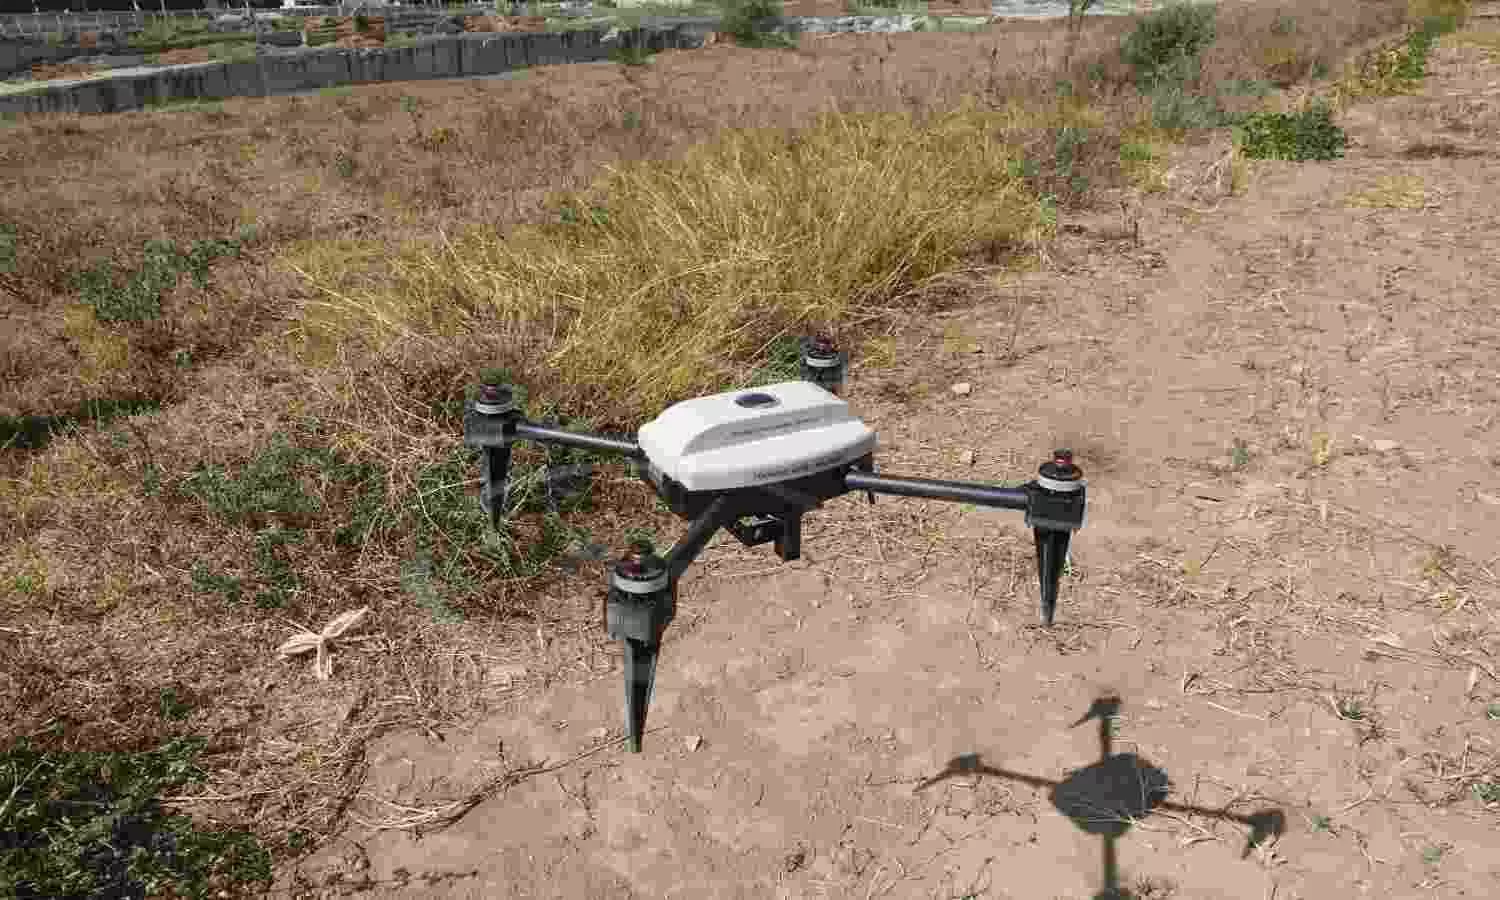 REL aspires to be Indias market leader in the drone business with NeoSky